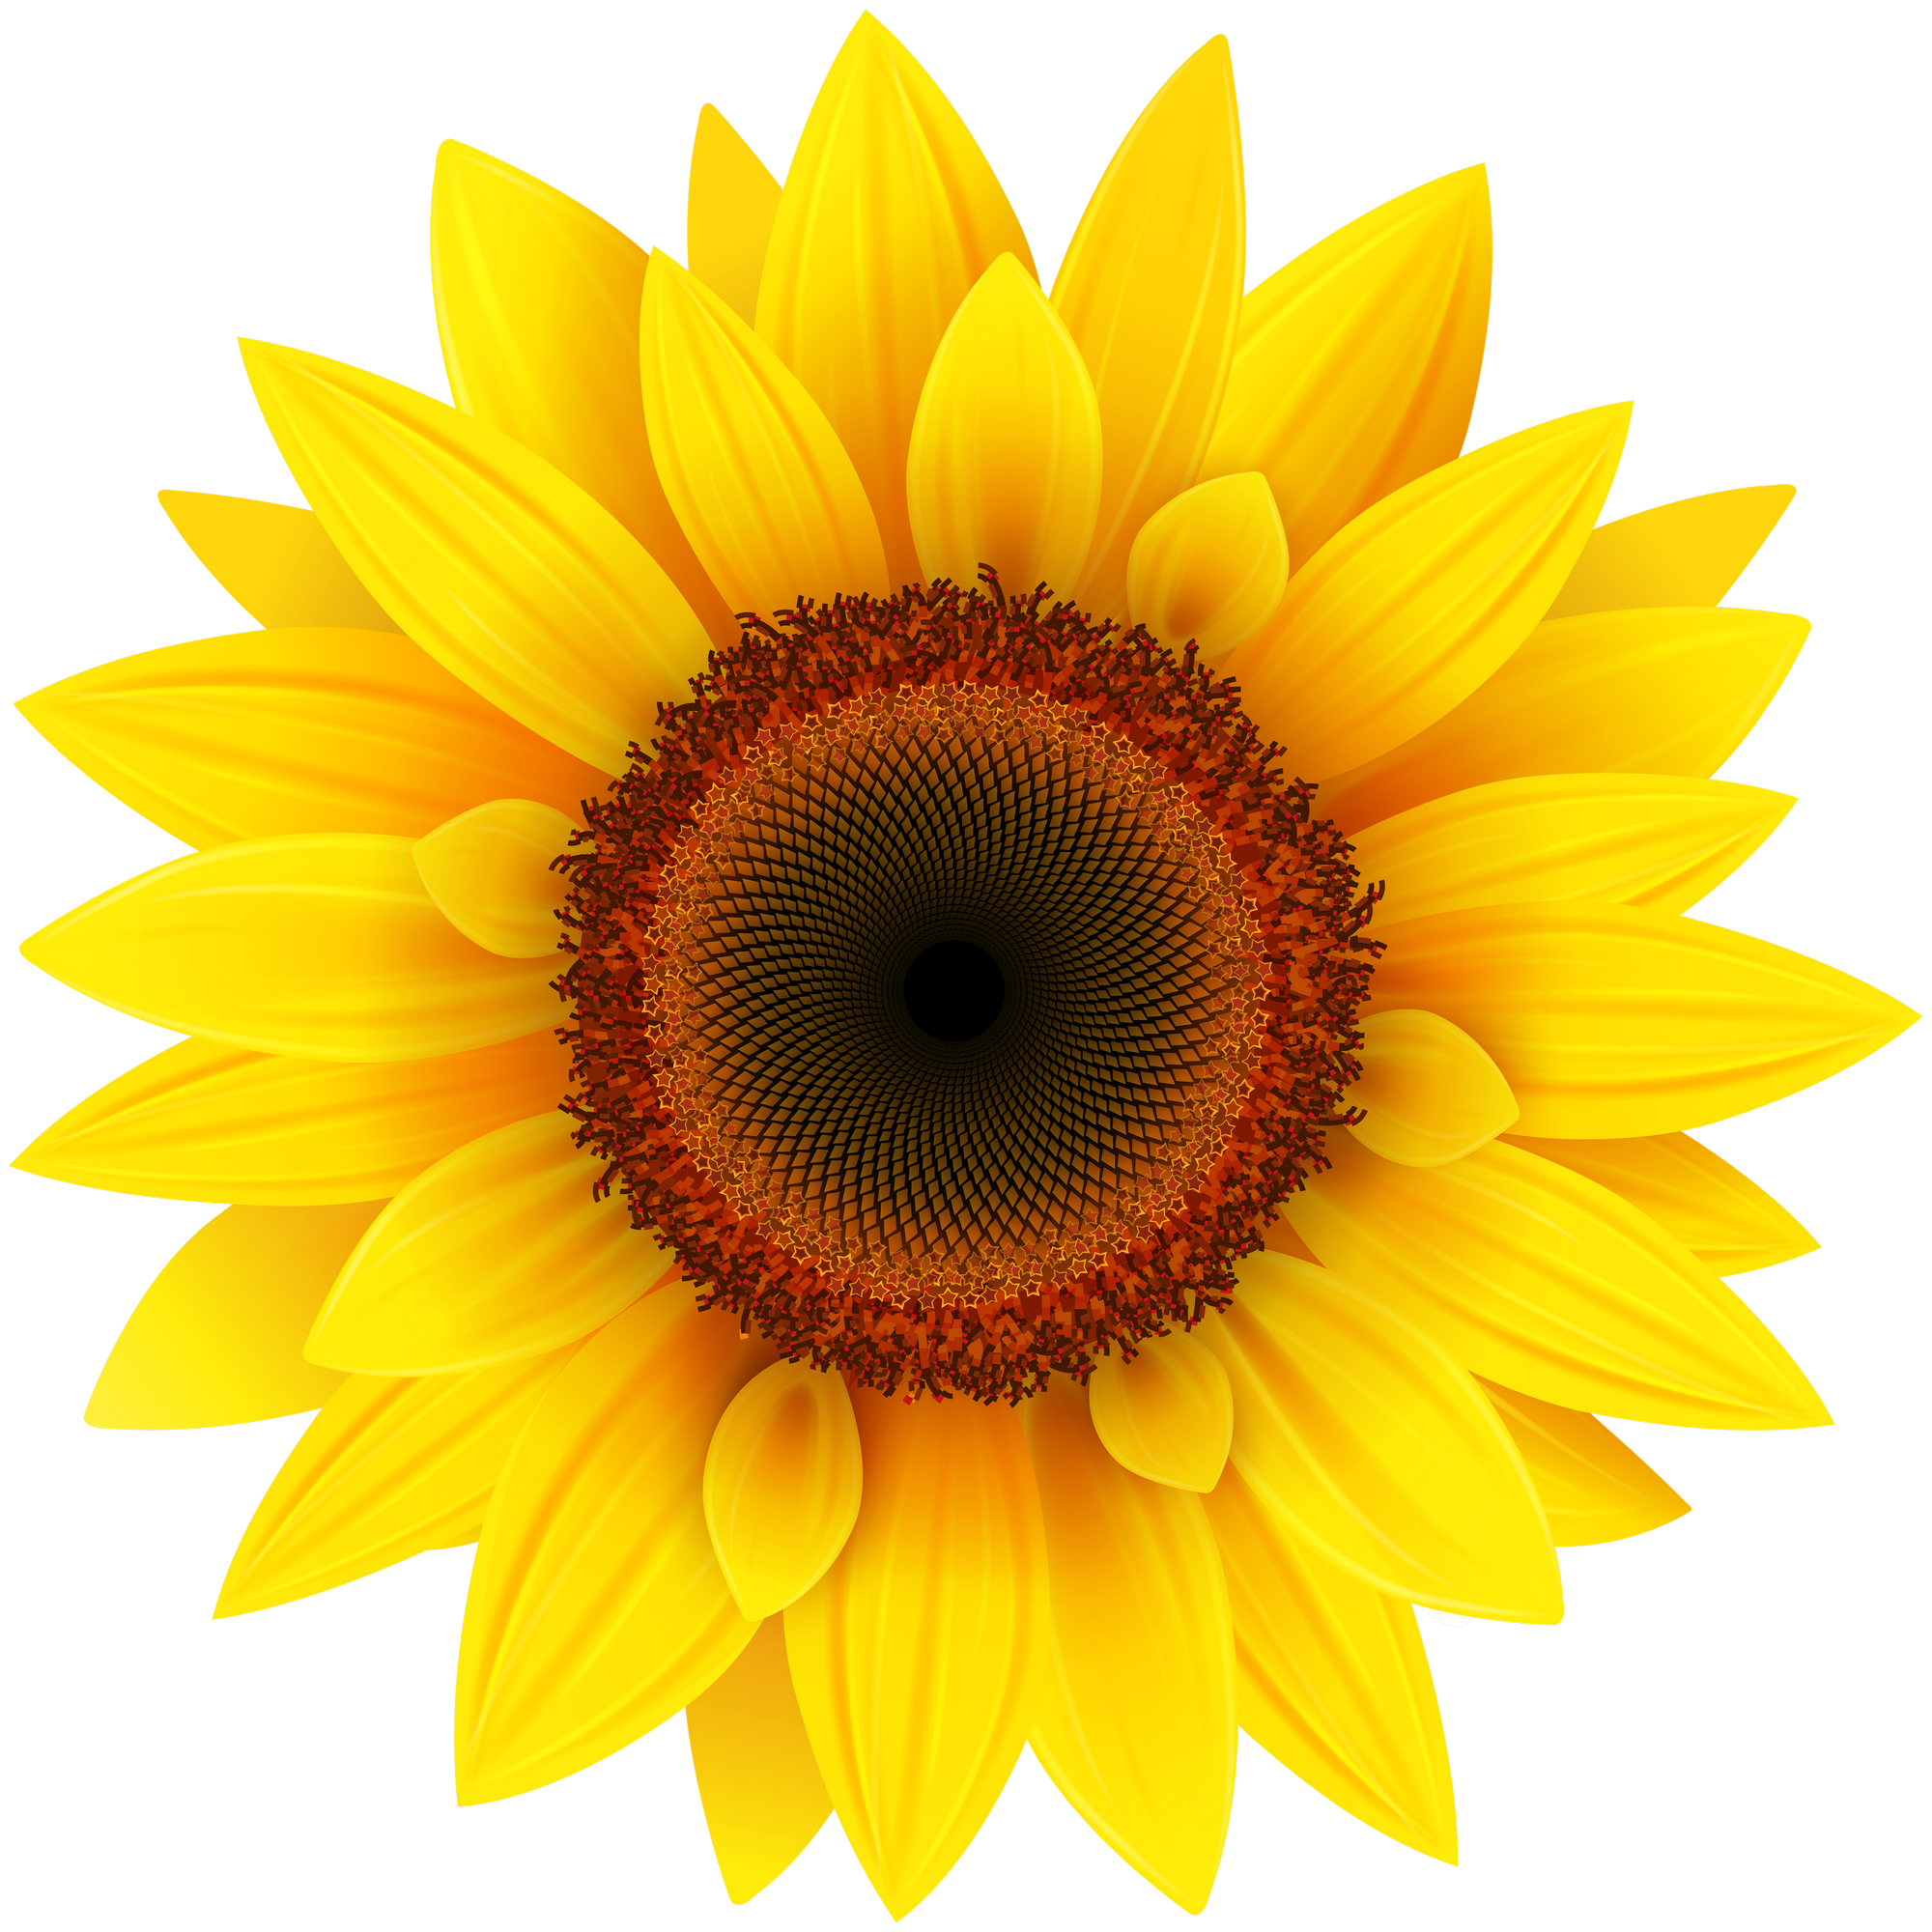 Sunflower PNG Image - PurePNG | Free transparent CC0 PNG Image Library